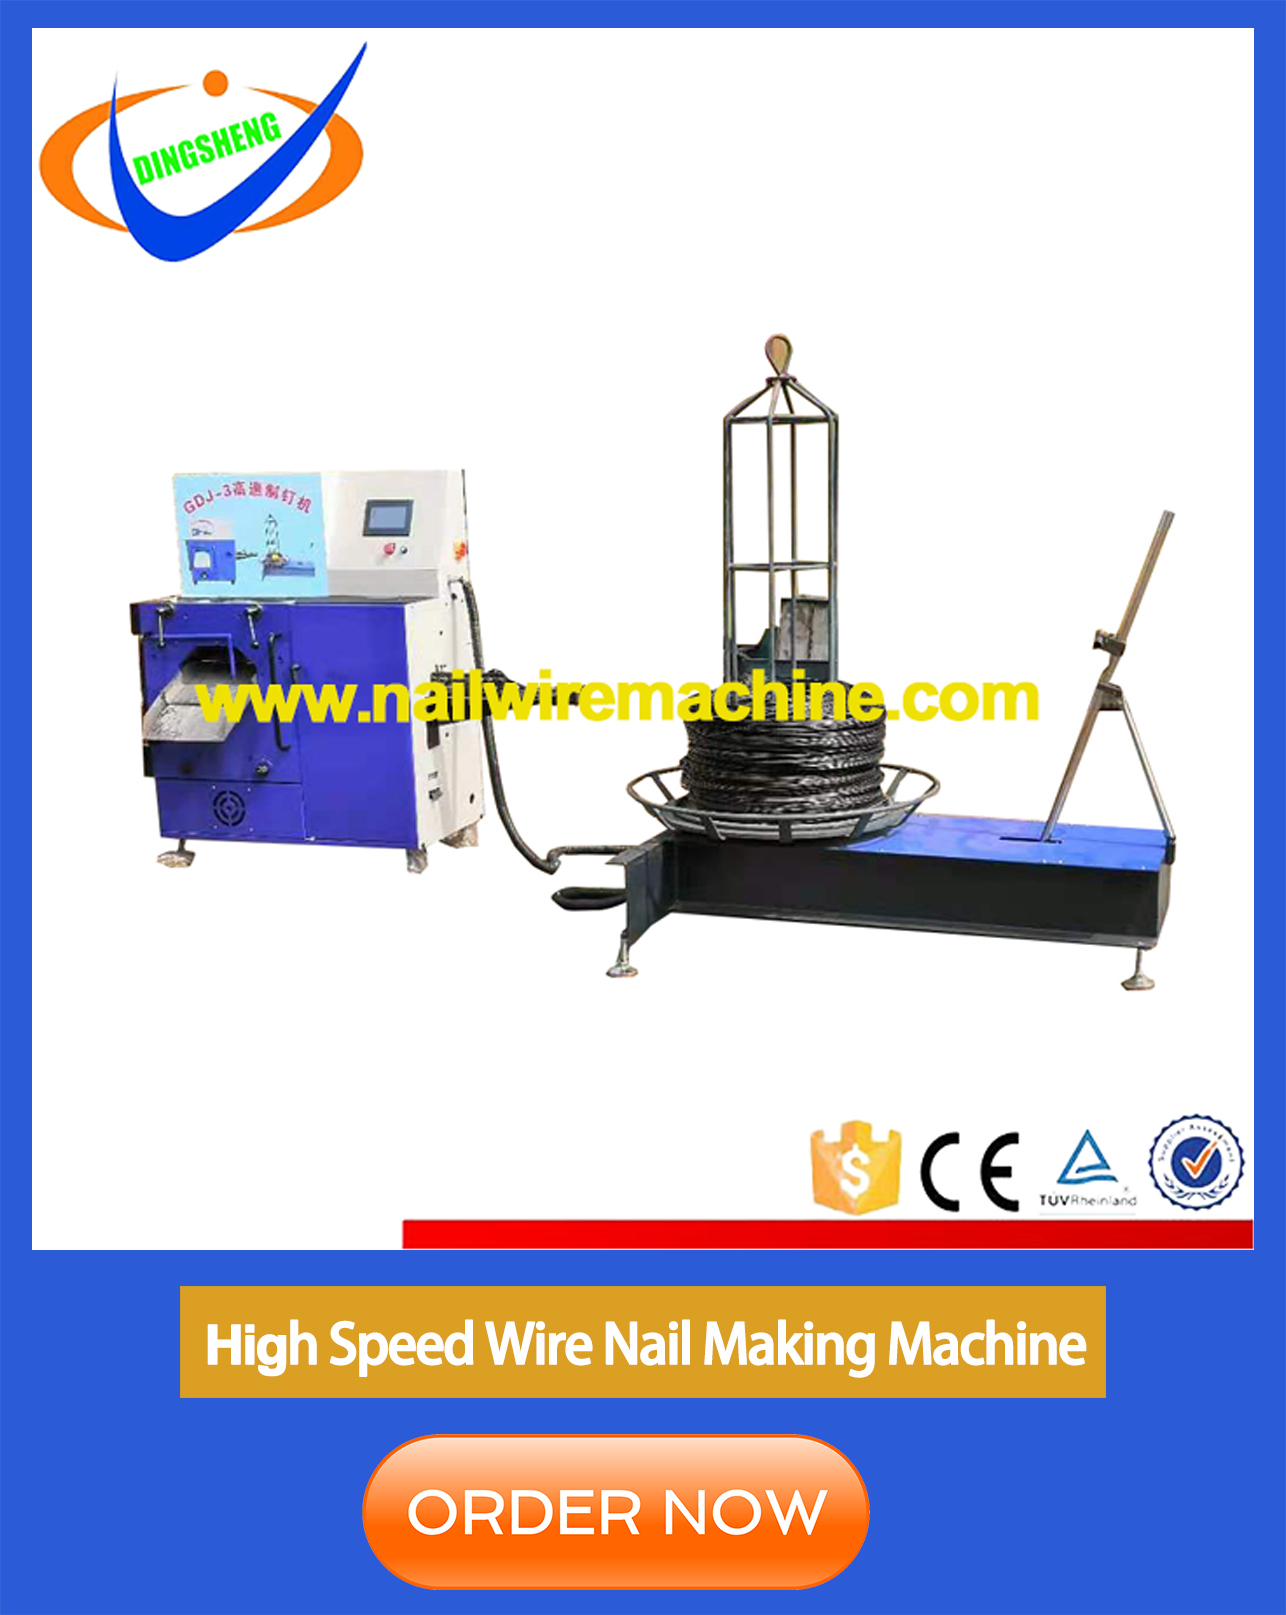 Cheap high speed automatic <a href=https://www.nailwiremachine.com/Automatic-steel-wire-nail-making-machine-Z94-1C-p.html target='_blank'><a href=https://www.nailwiremachine.com/Automatic-steel-wire-nail-making-machine-Z94-1C-p.html target='_blank'>steel wire nail machine</a></a> factory